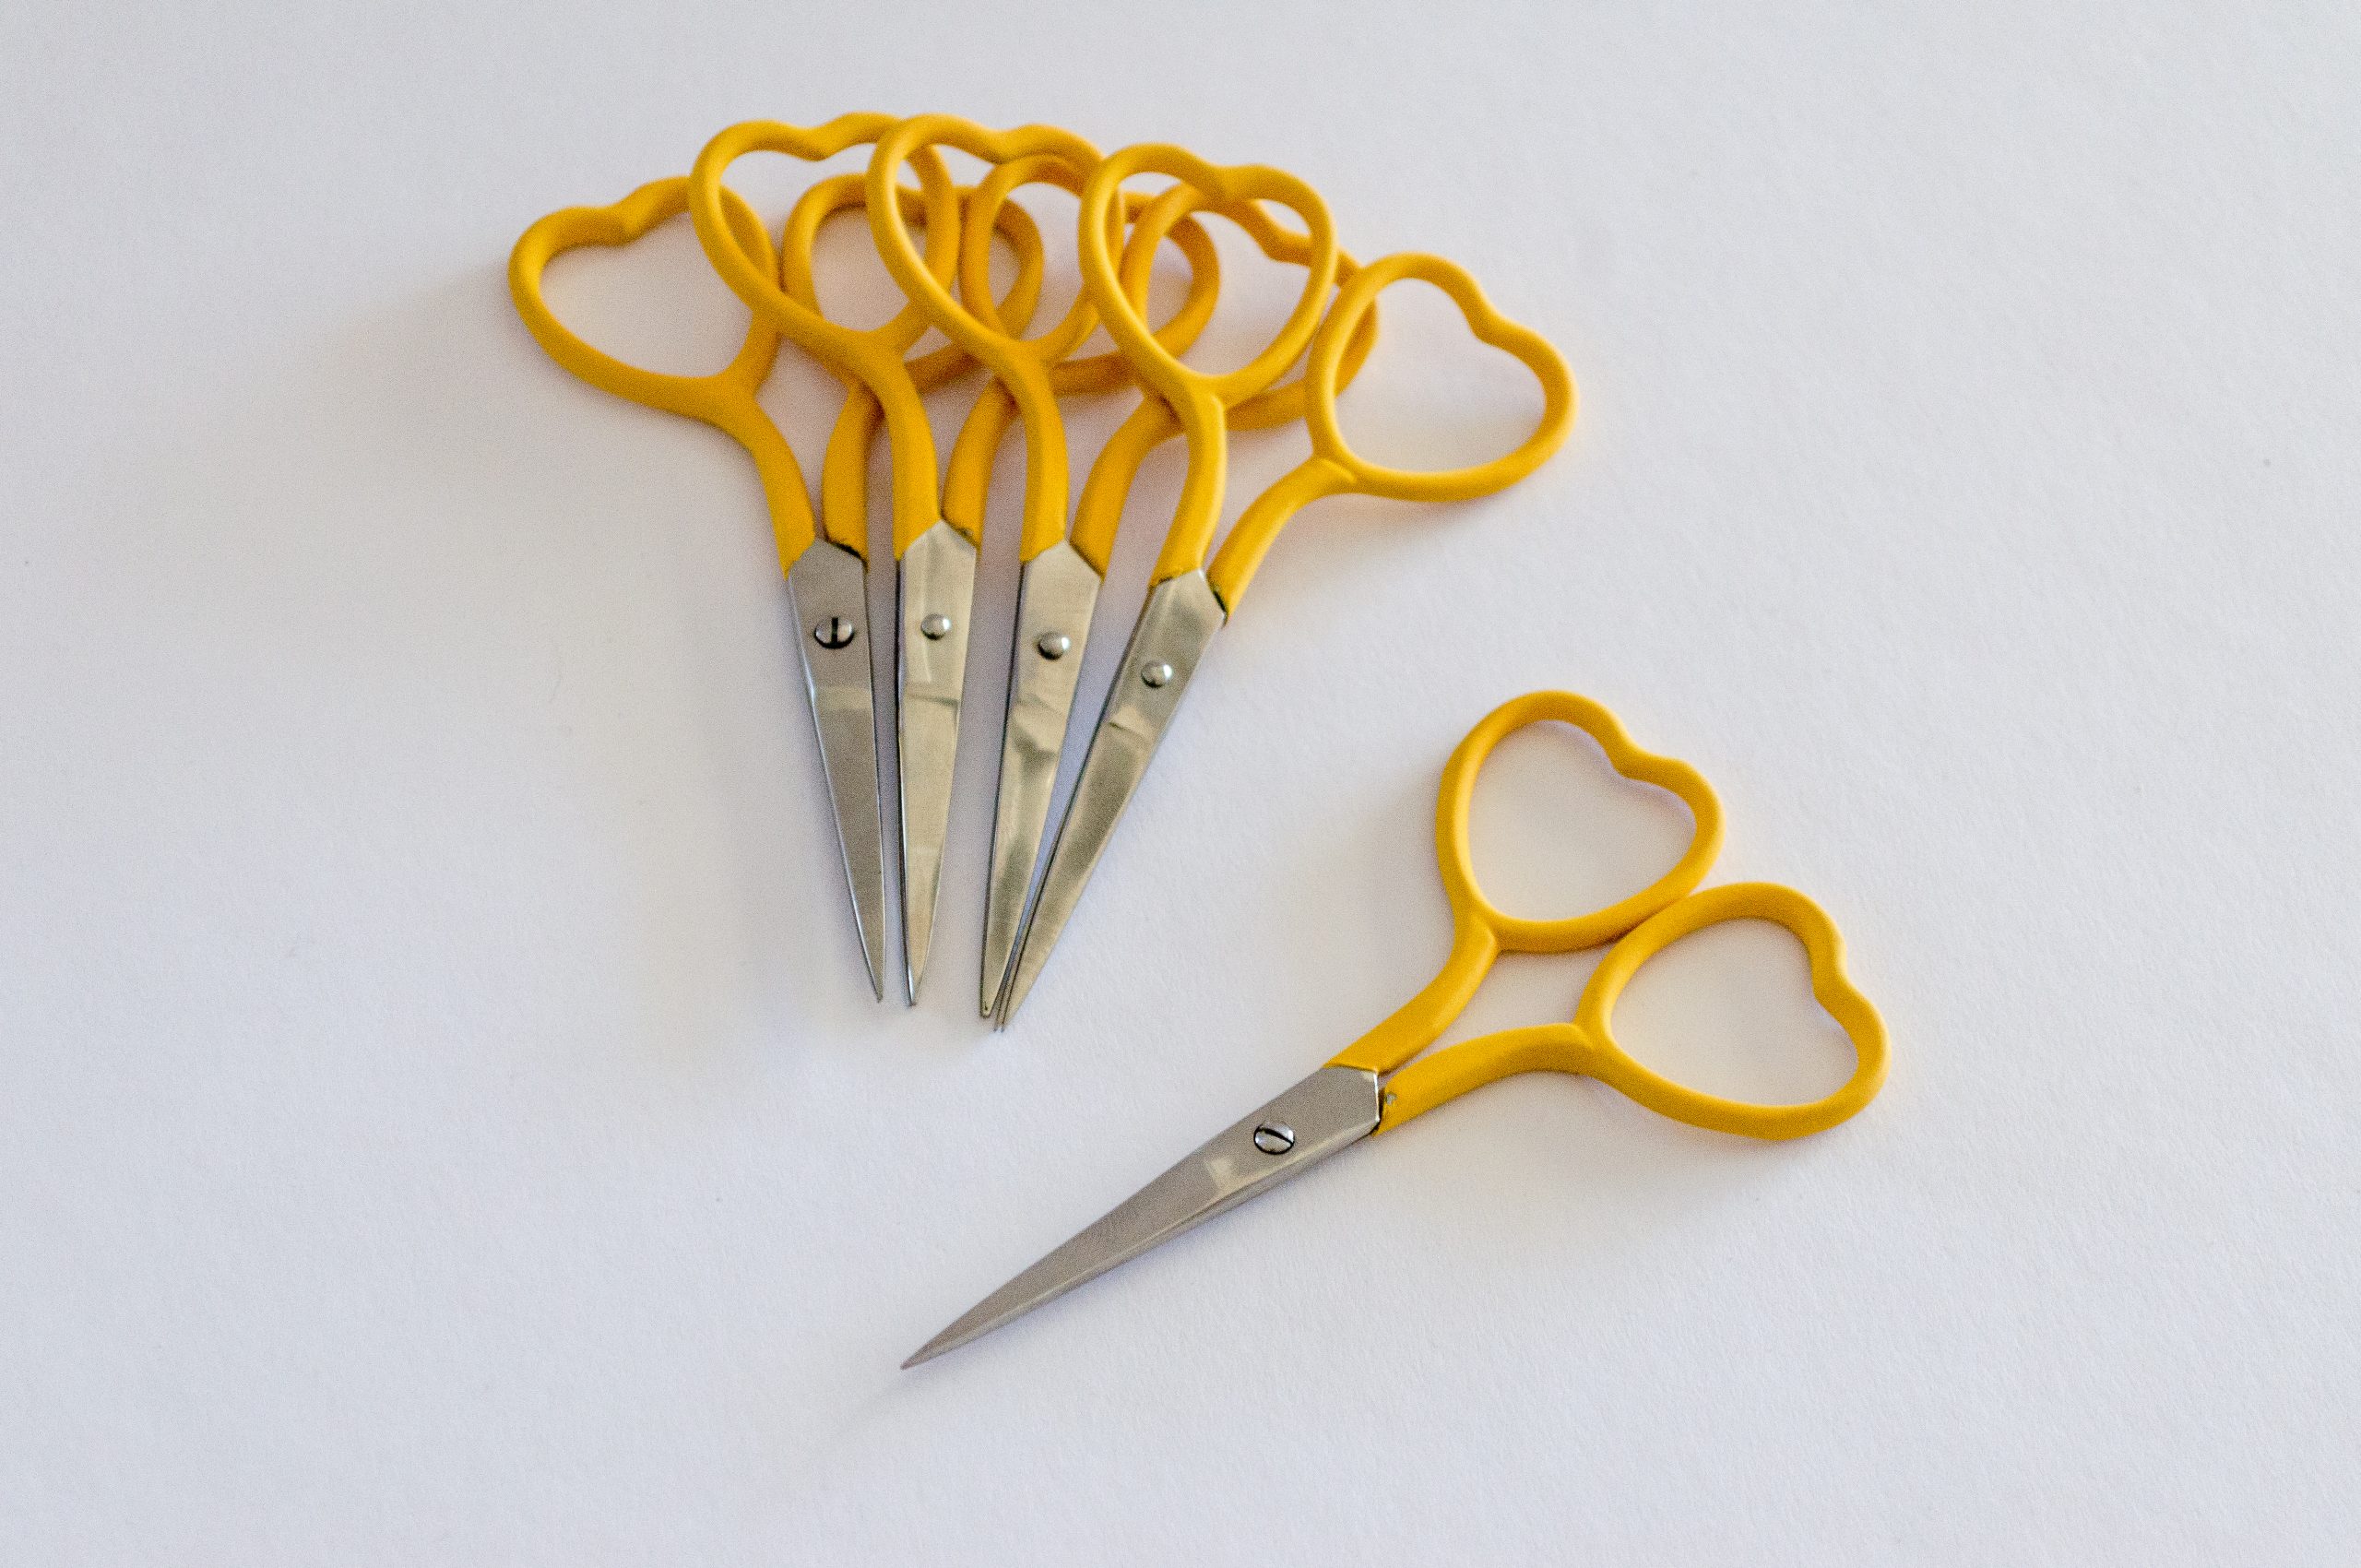 Heart-Shaped Embroidery Scissors